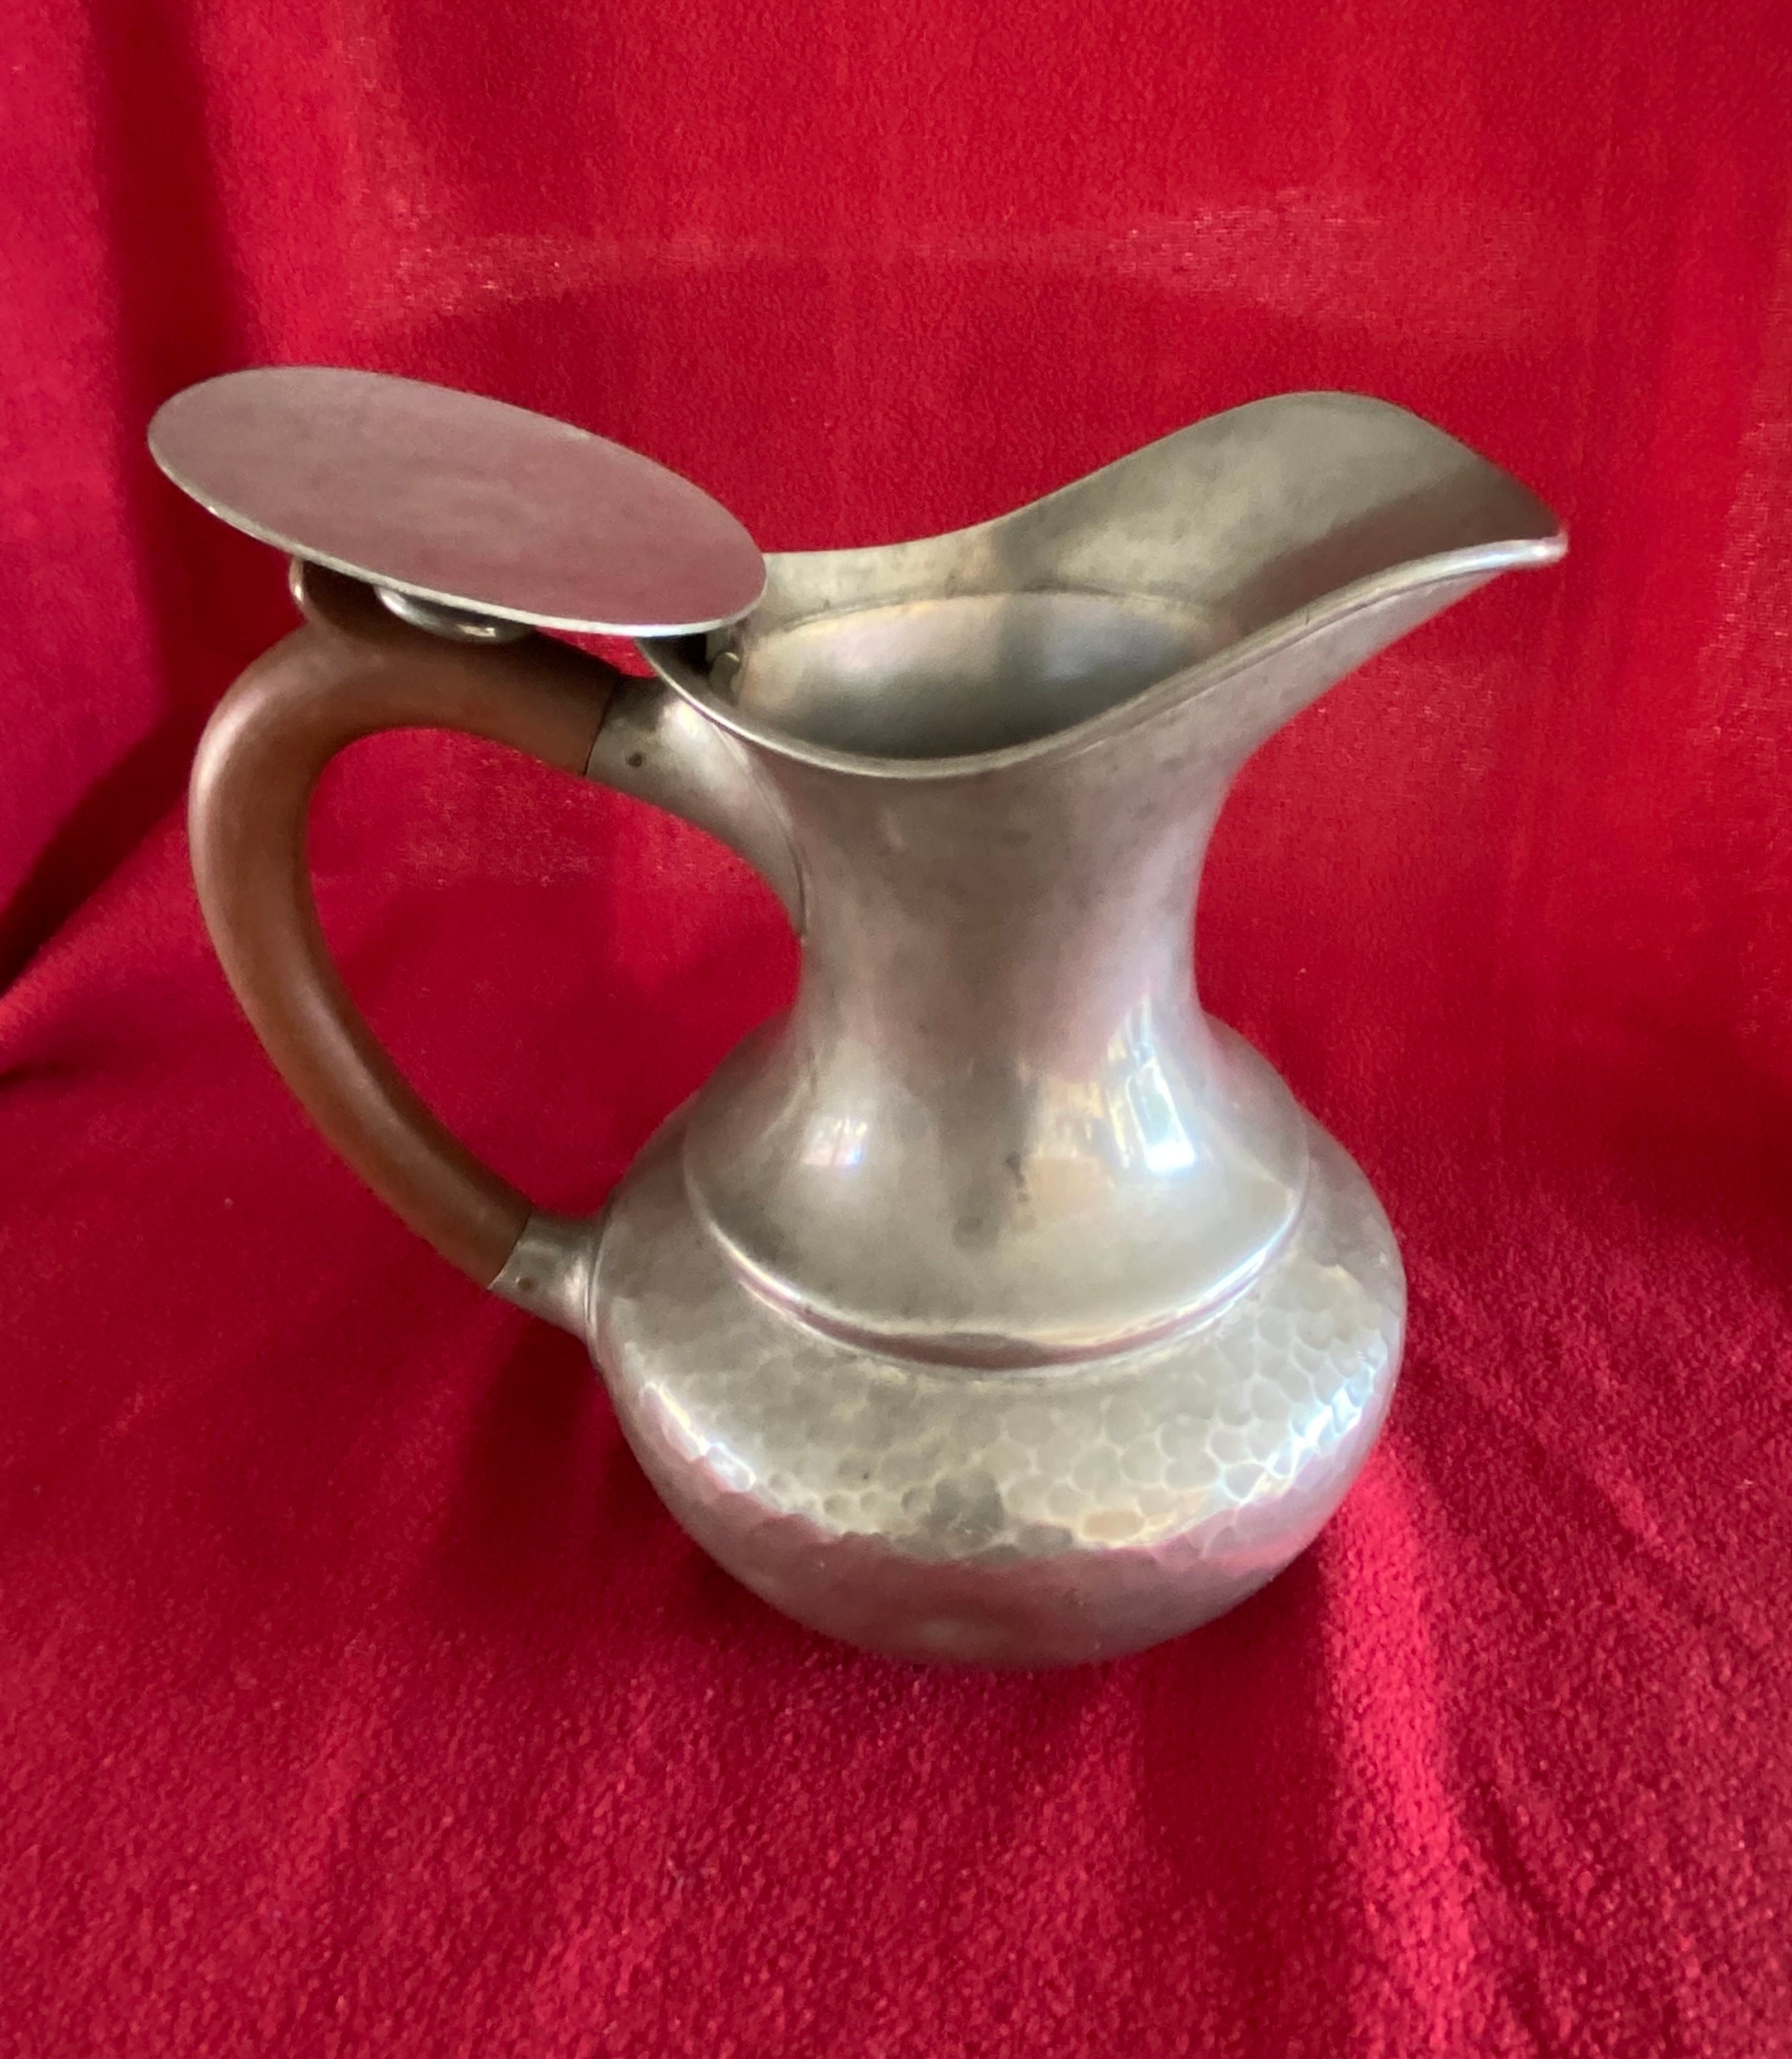 Pitcher Staffordshire England Aesthetic Hot Water Jug Dixon Pewter